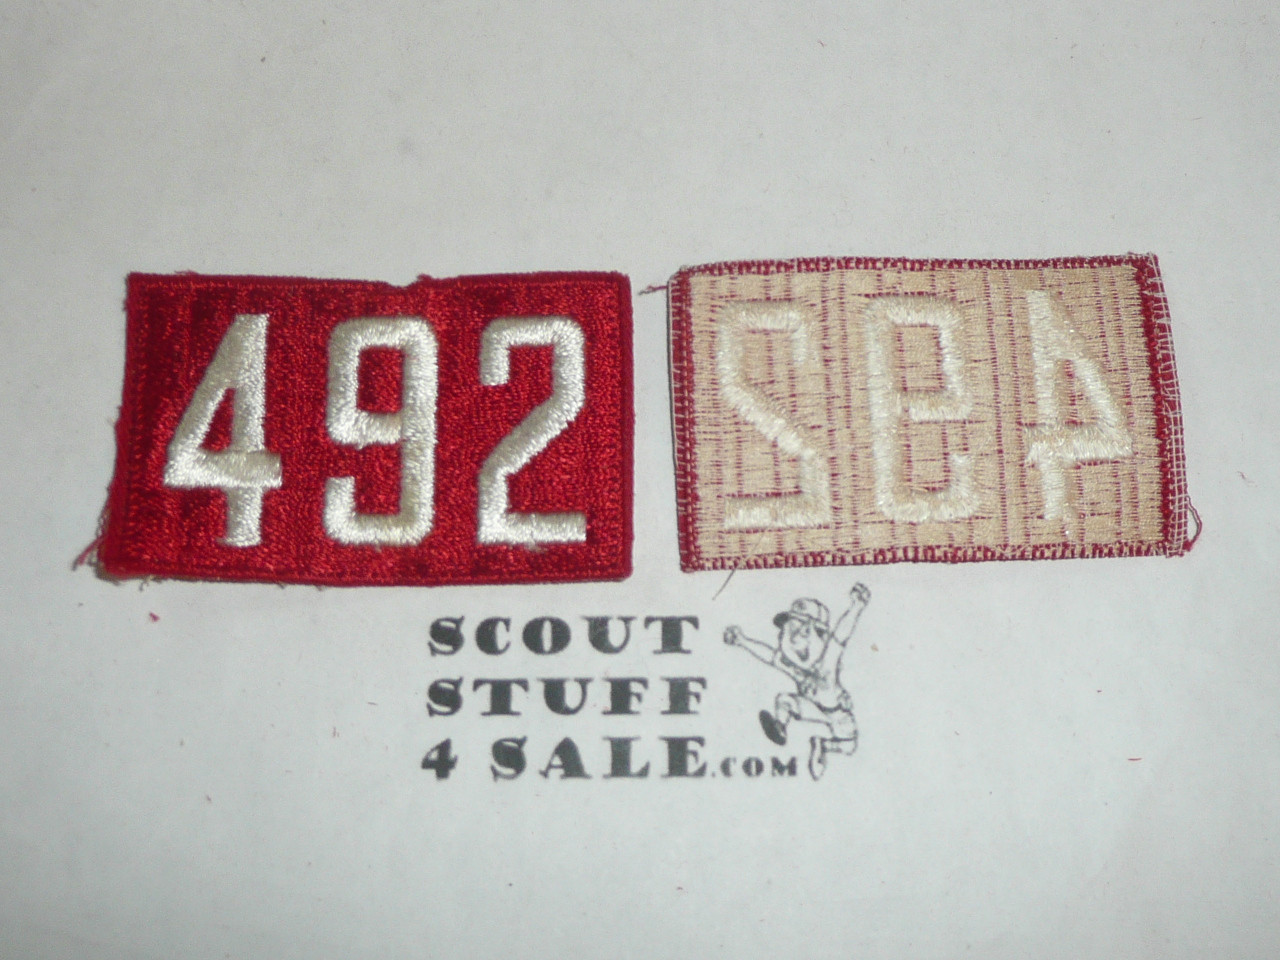 1970's Red Troop Numeral "492", fully embroidered, Unused